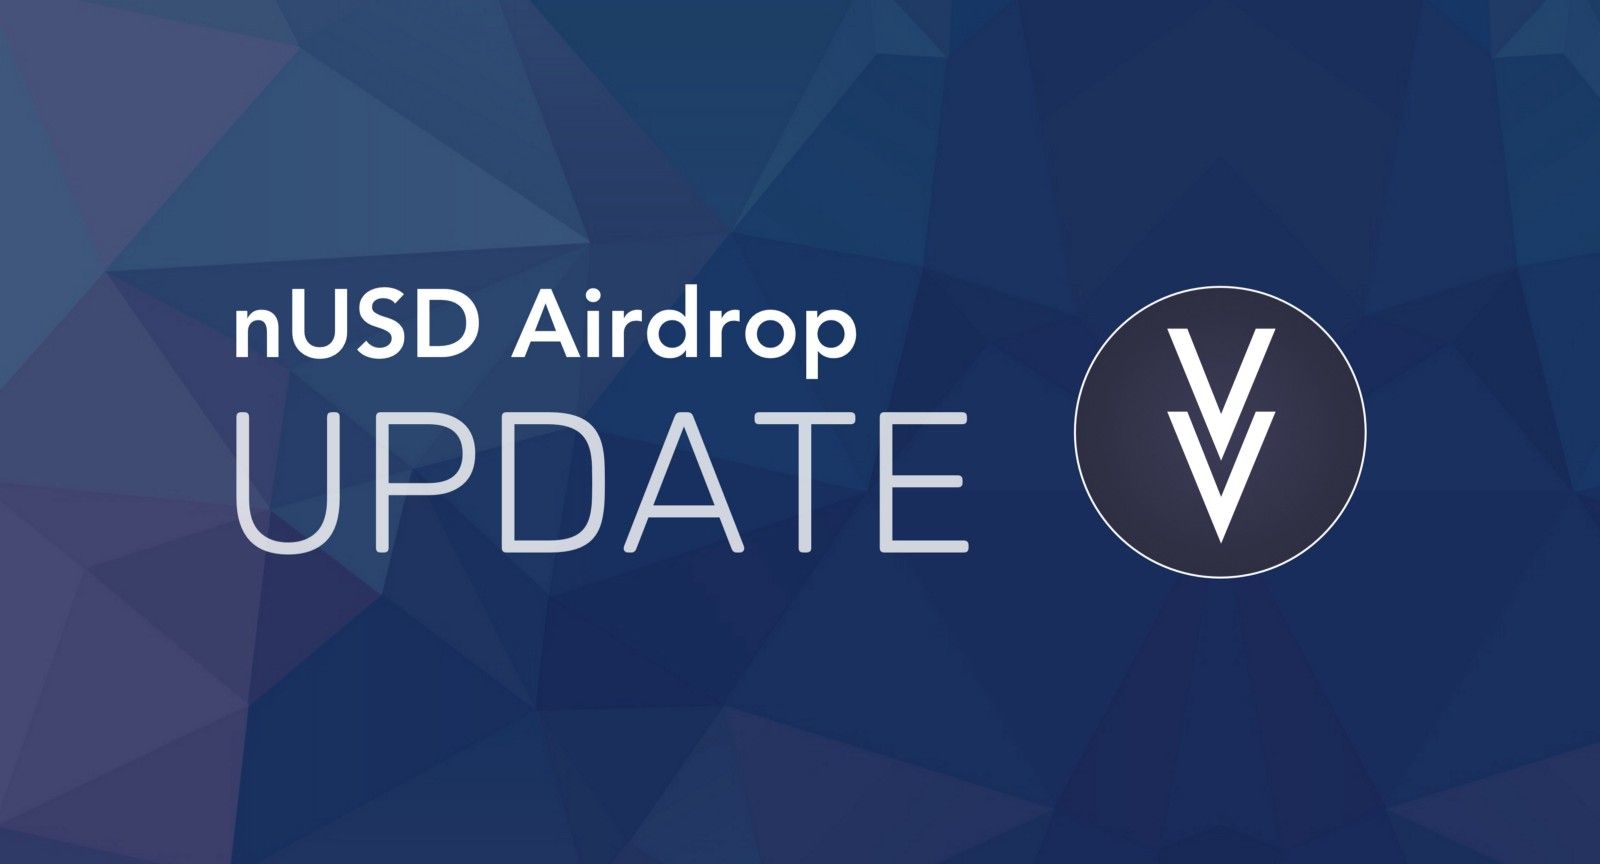 nUSD Airdrop Update: we're extending the nUSD Airdrop for three days!